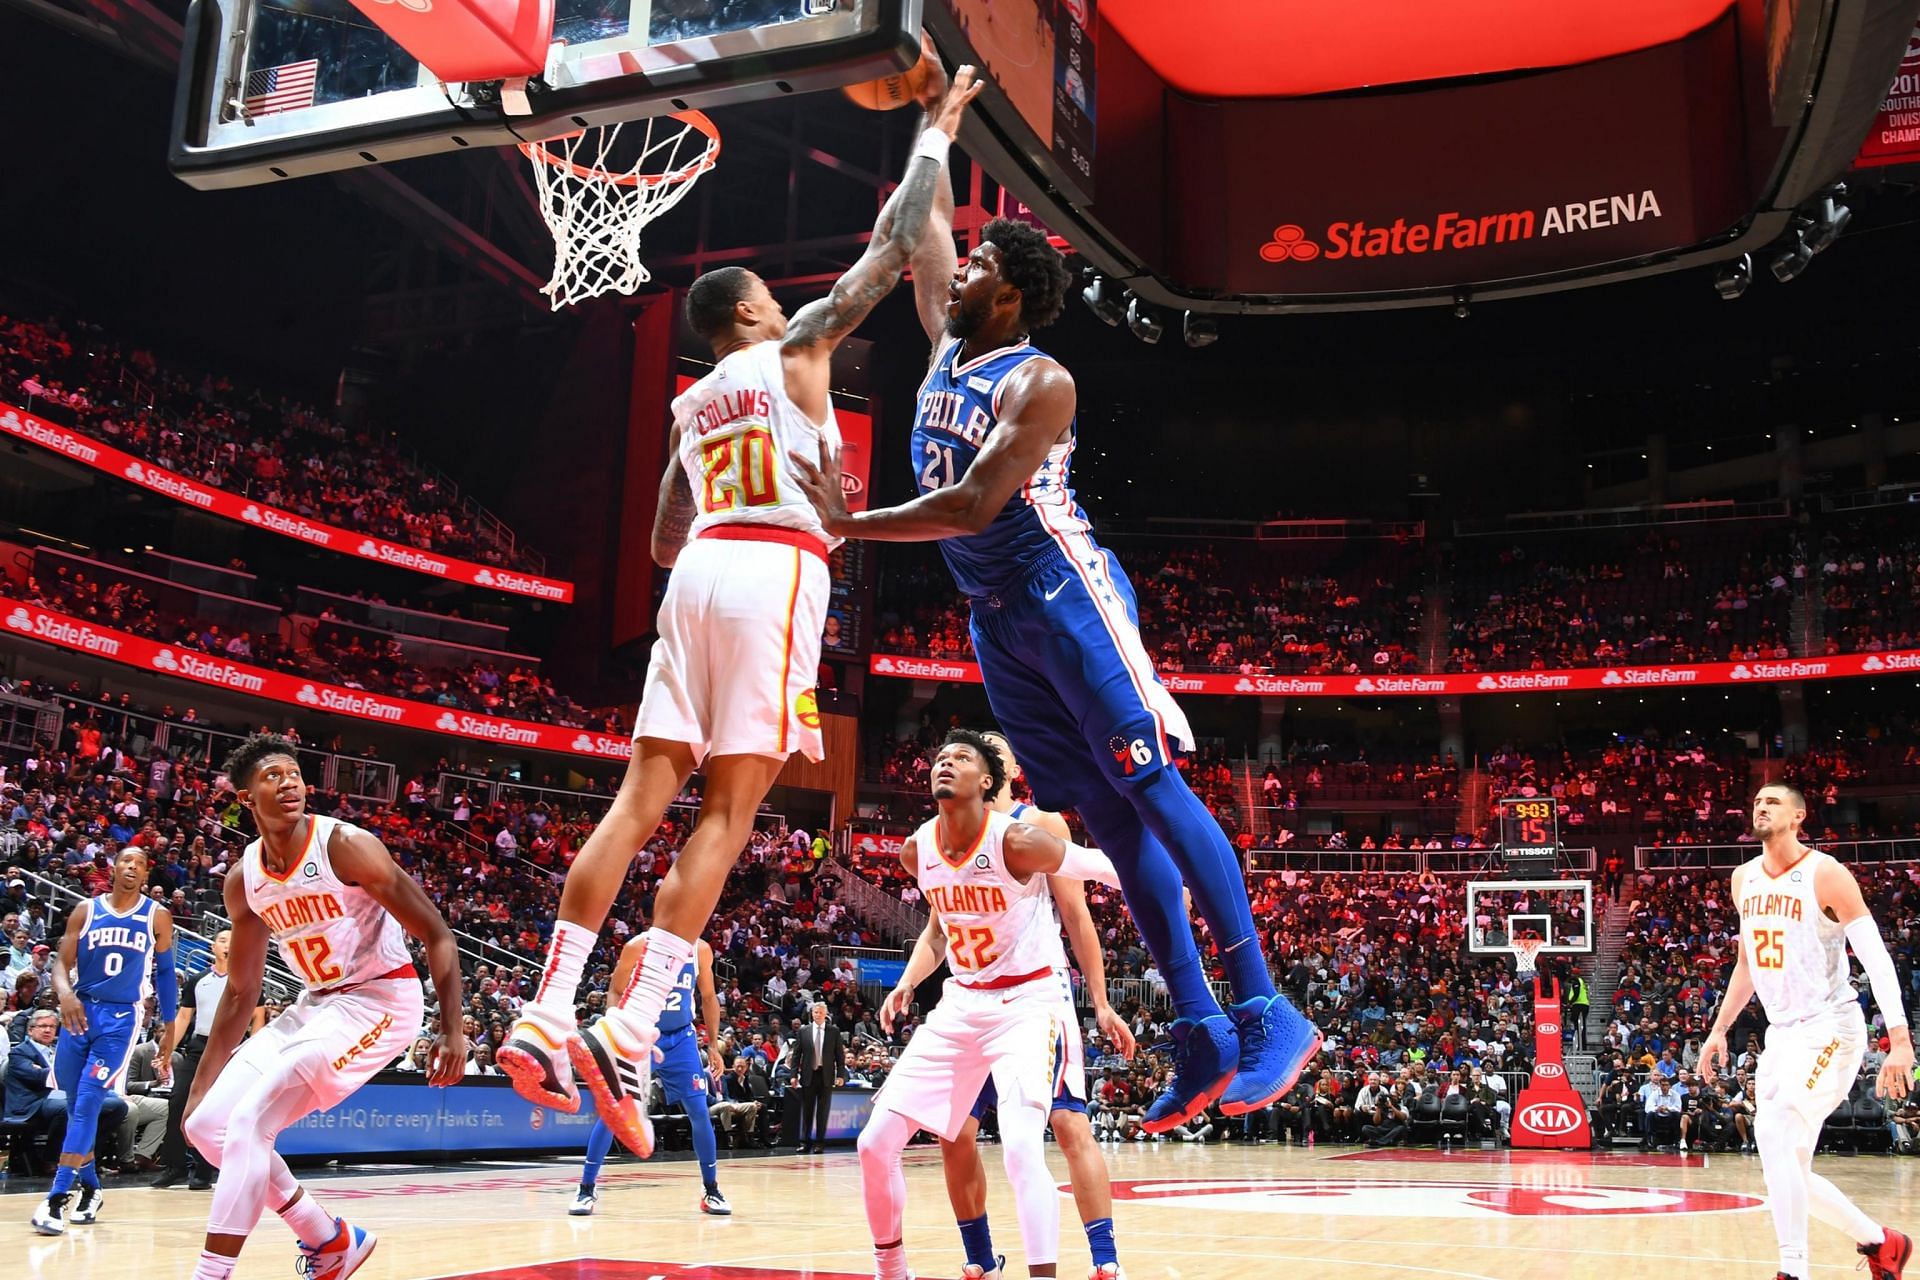 The Philadelphia 76ers will be looking to go up 2-0 against the Atlanta Hawks this season when they meet again on Friday. [Photo: Bleacher Report]